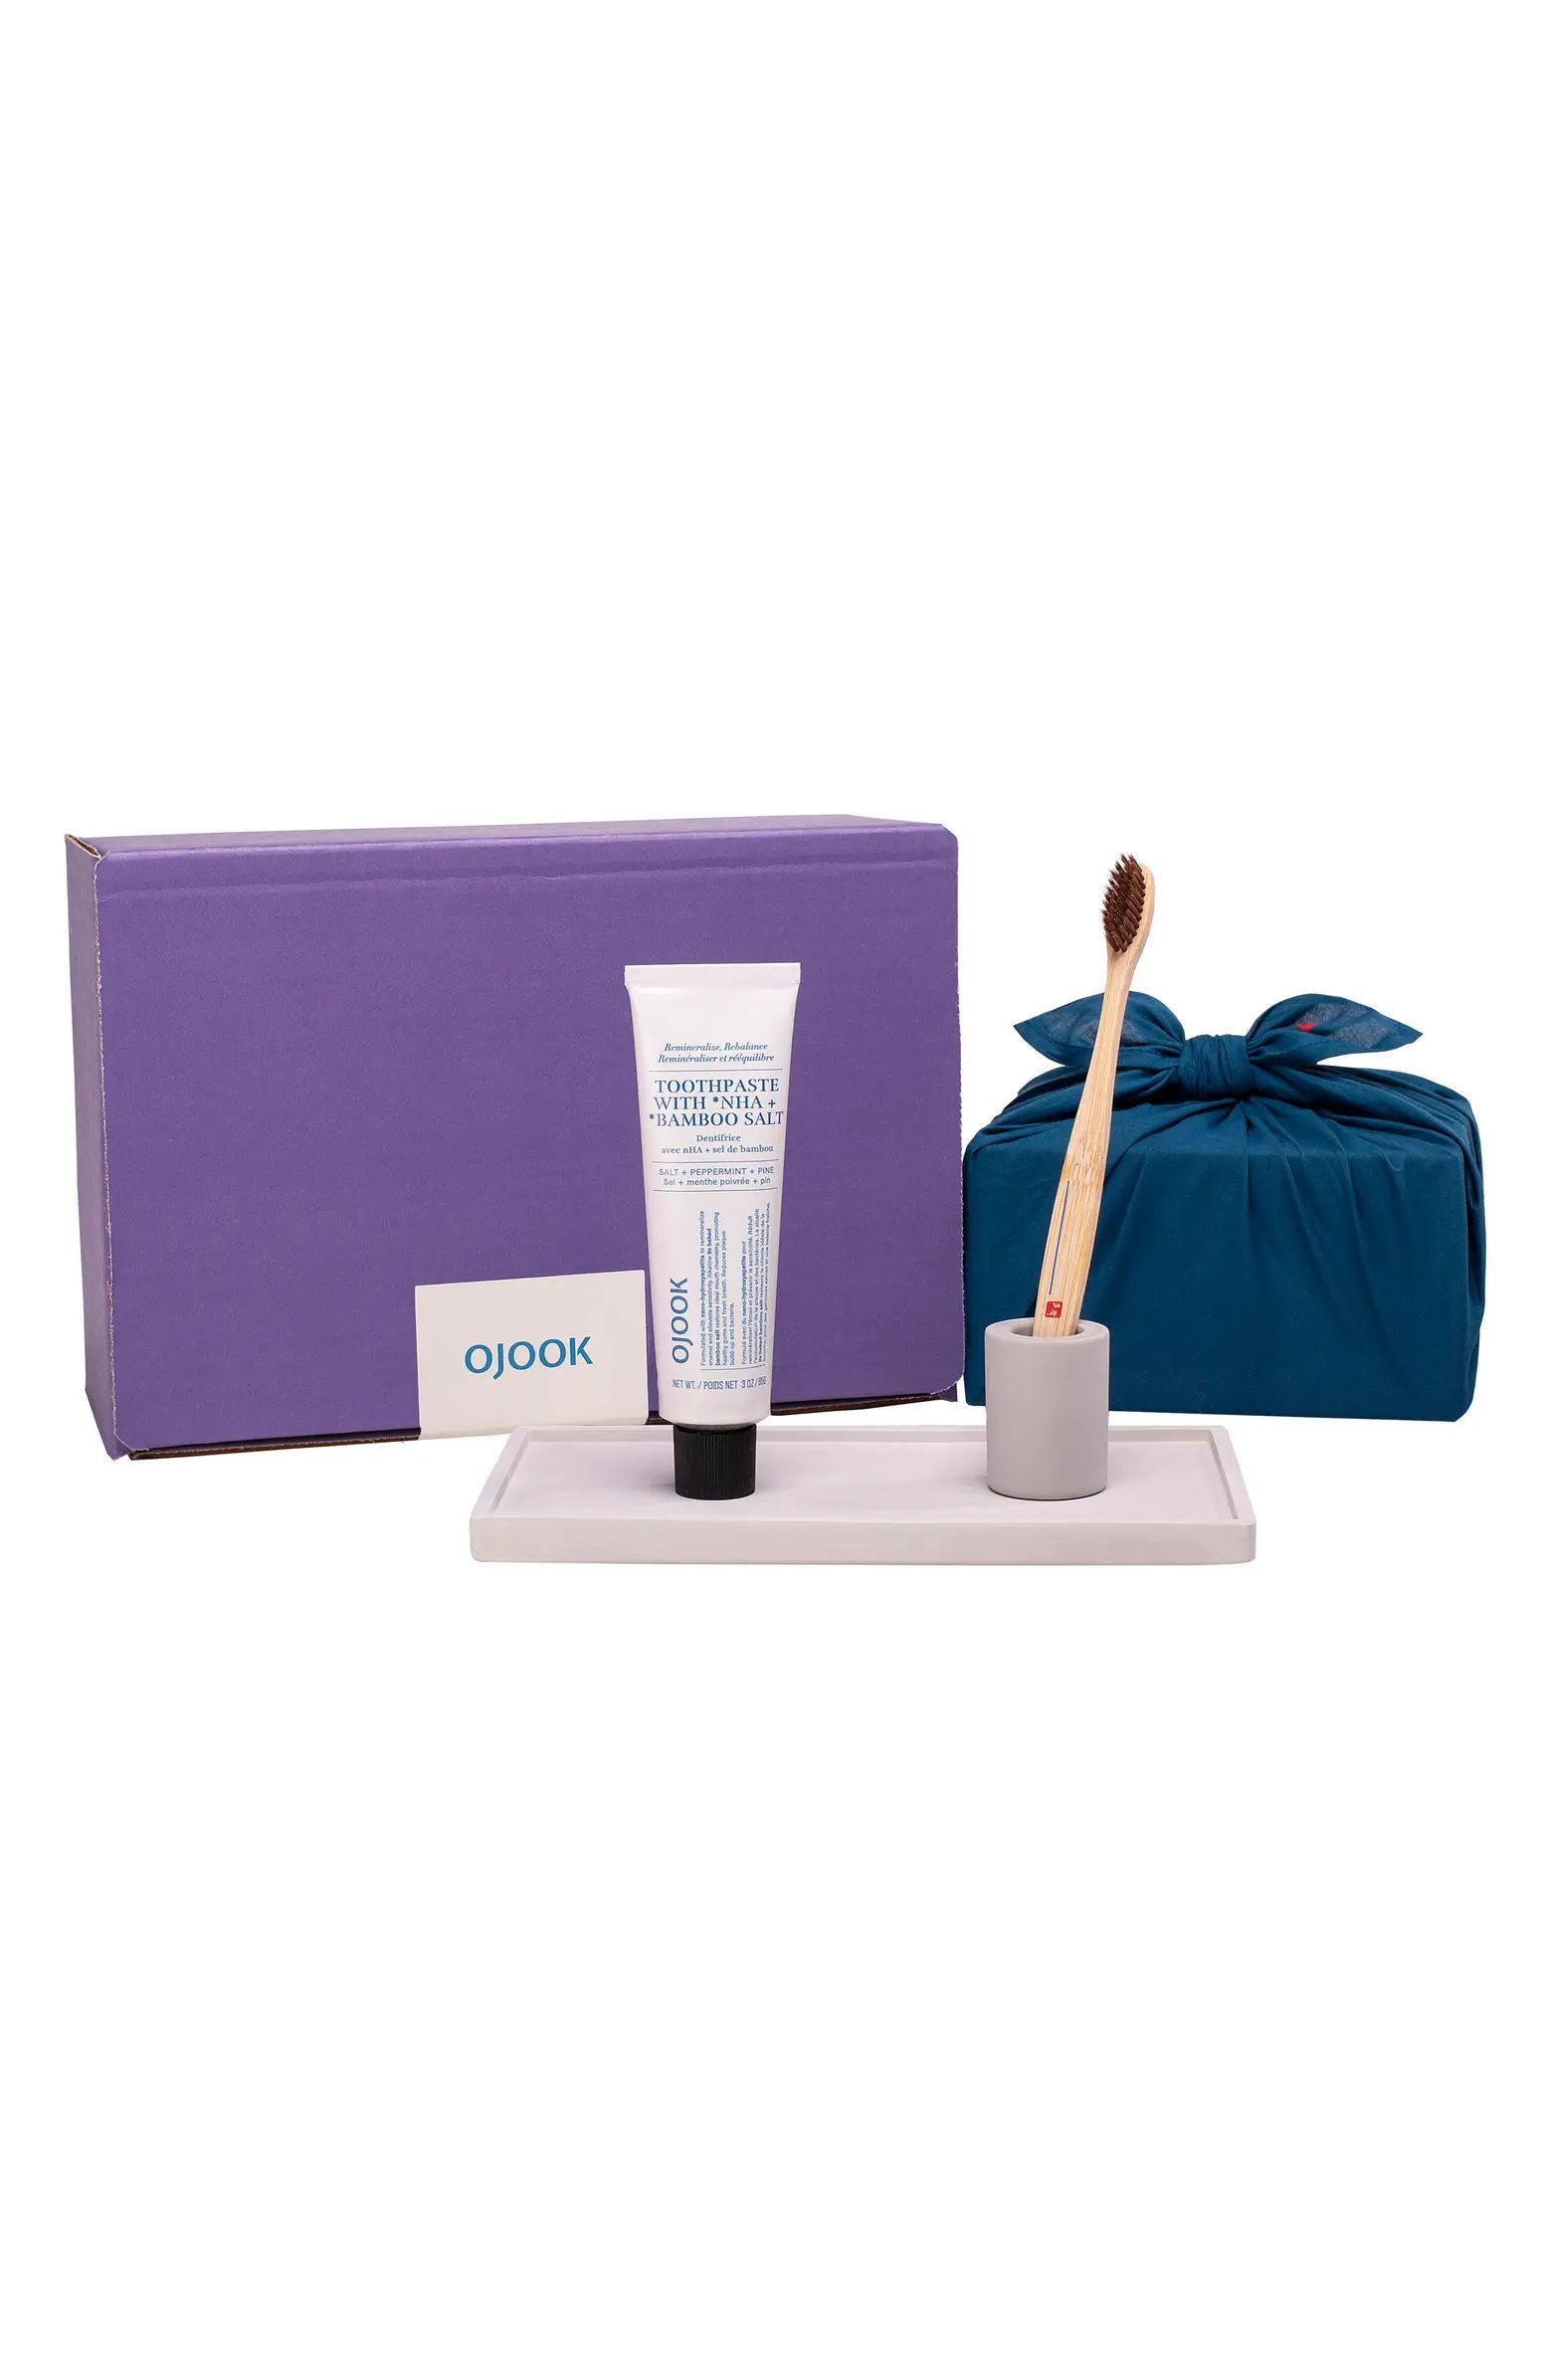 Intention Toothbrush, Toothpaste & Tray Set | Nordstrom